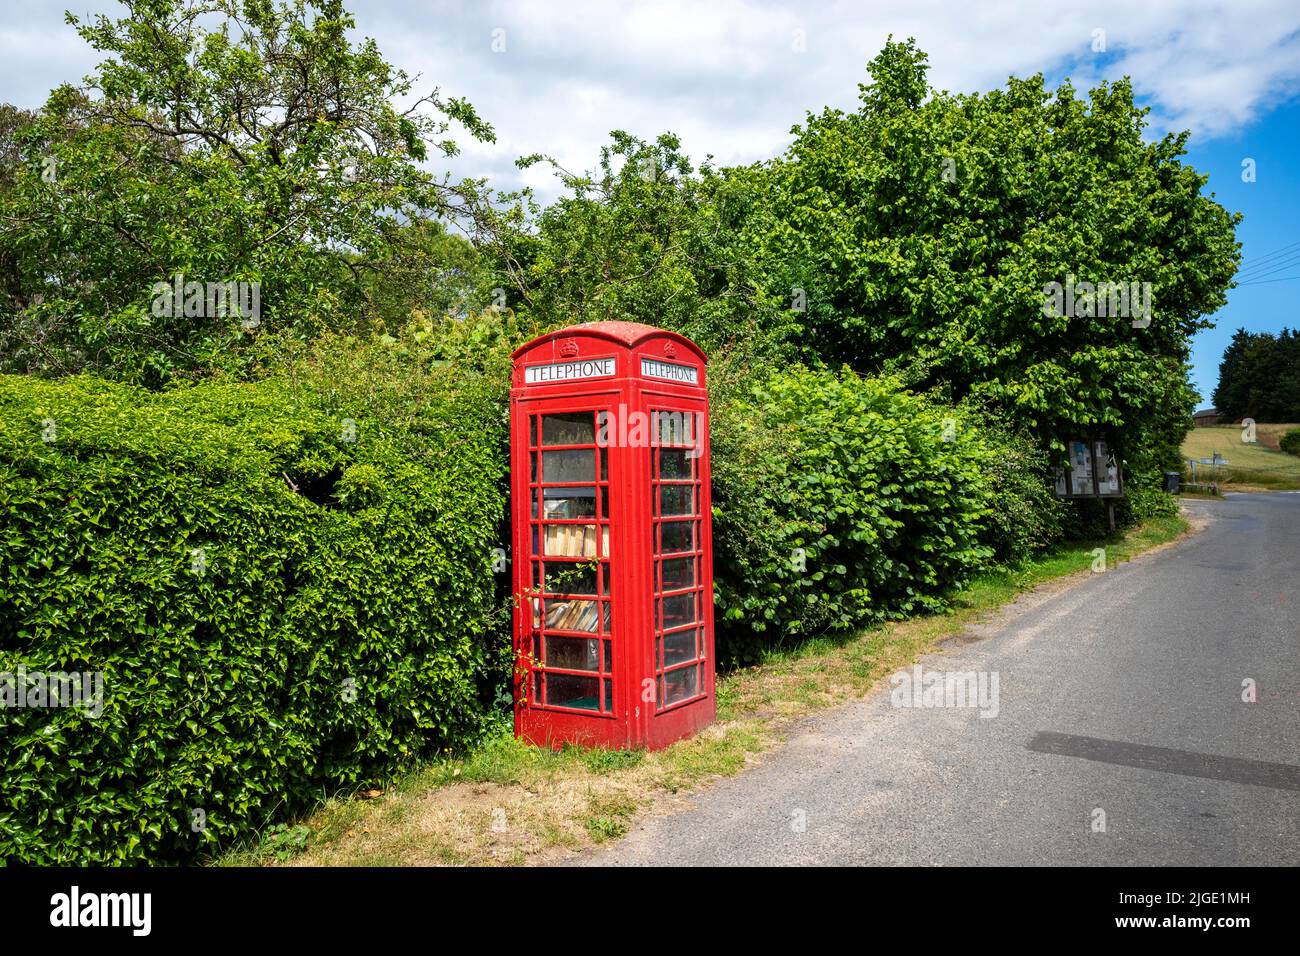 Former BT red telephone box now used as a library Parham Suffolk UK Stock Photo